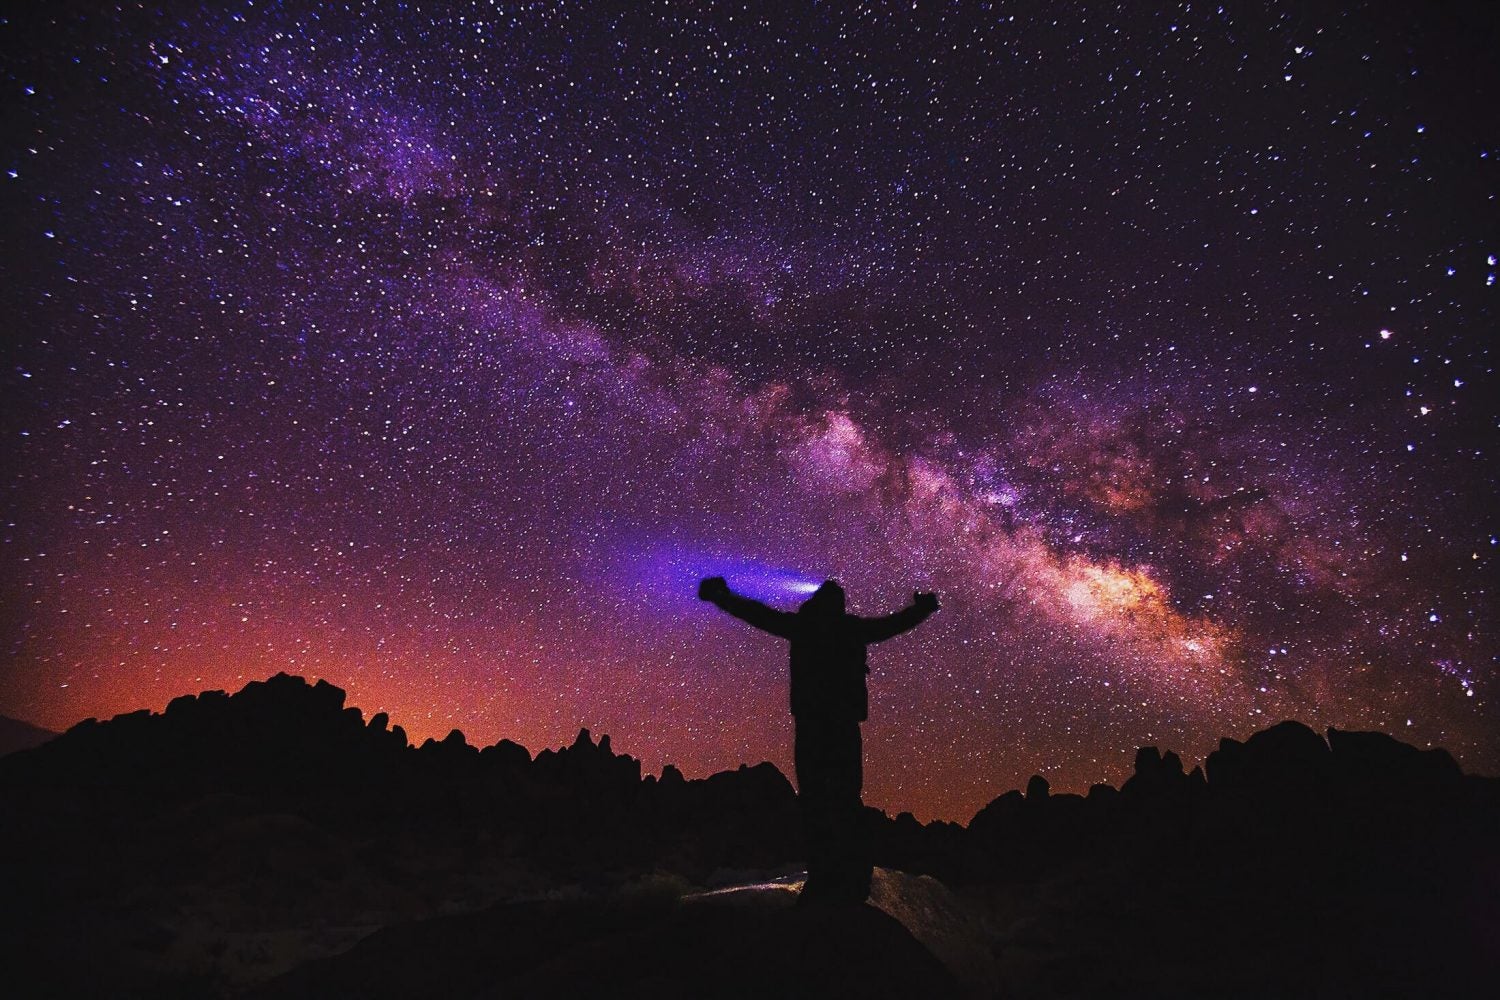 silhouette of a hiker wearing a headlamp as milky way is seen above in the purple and pink night sky